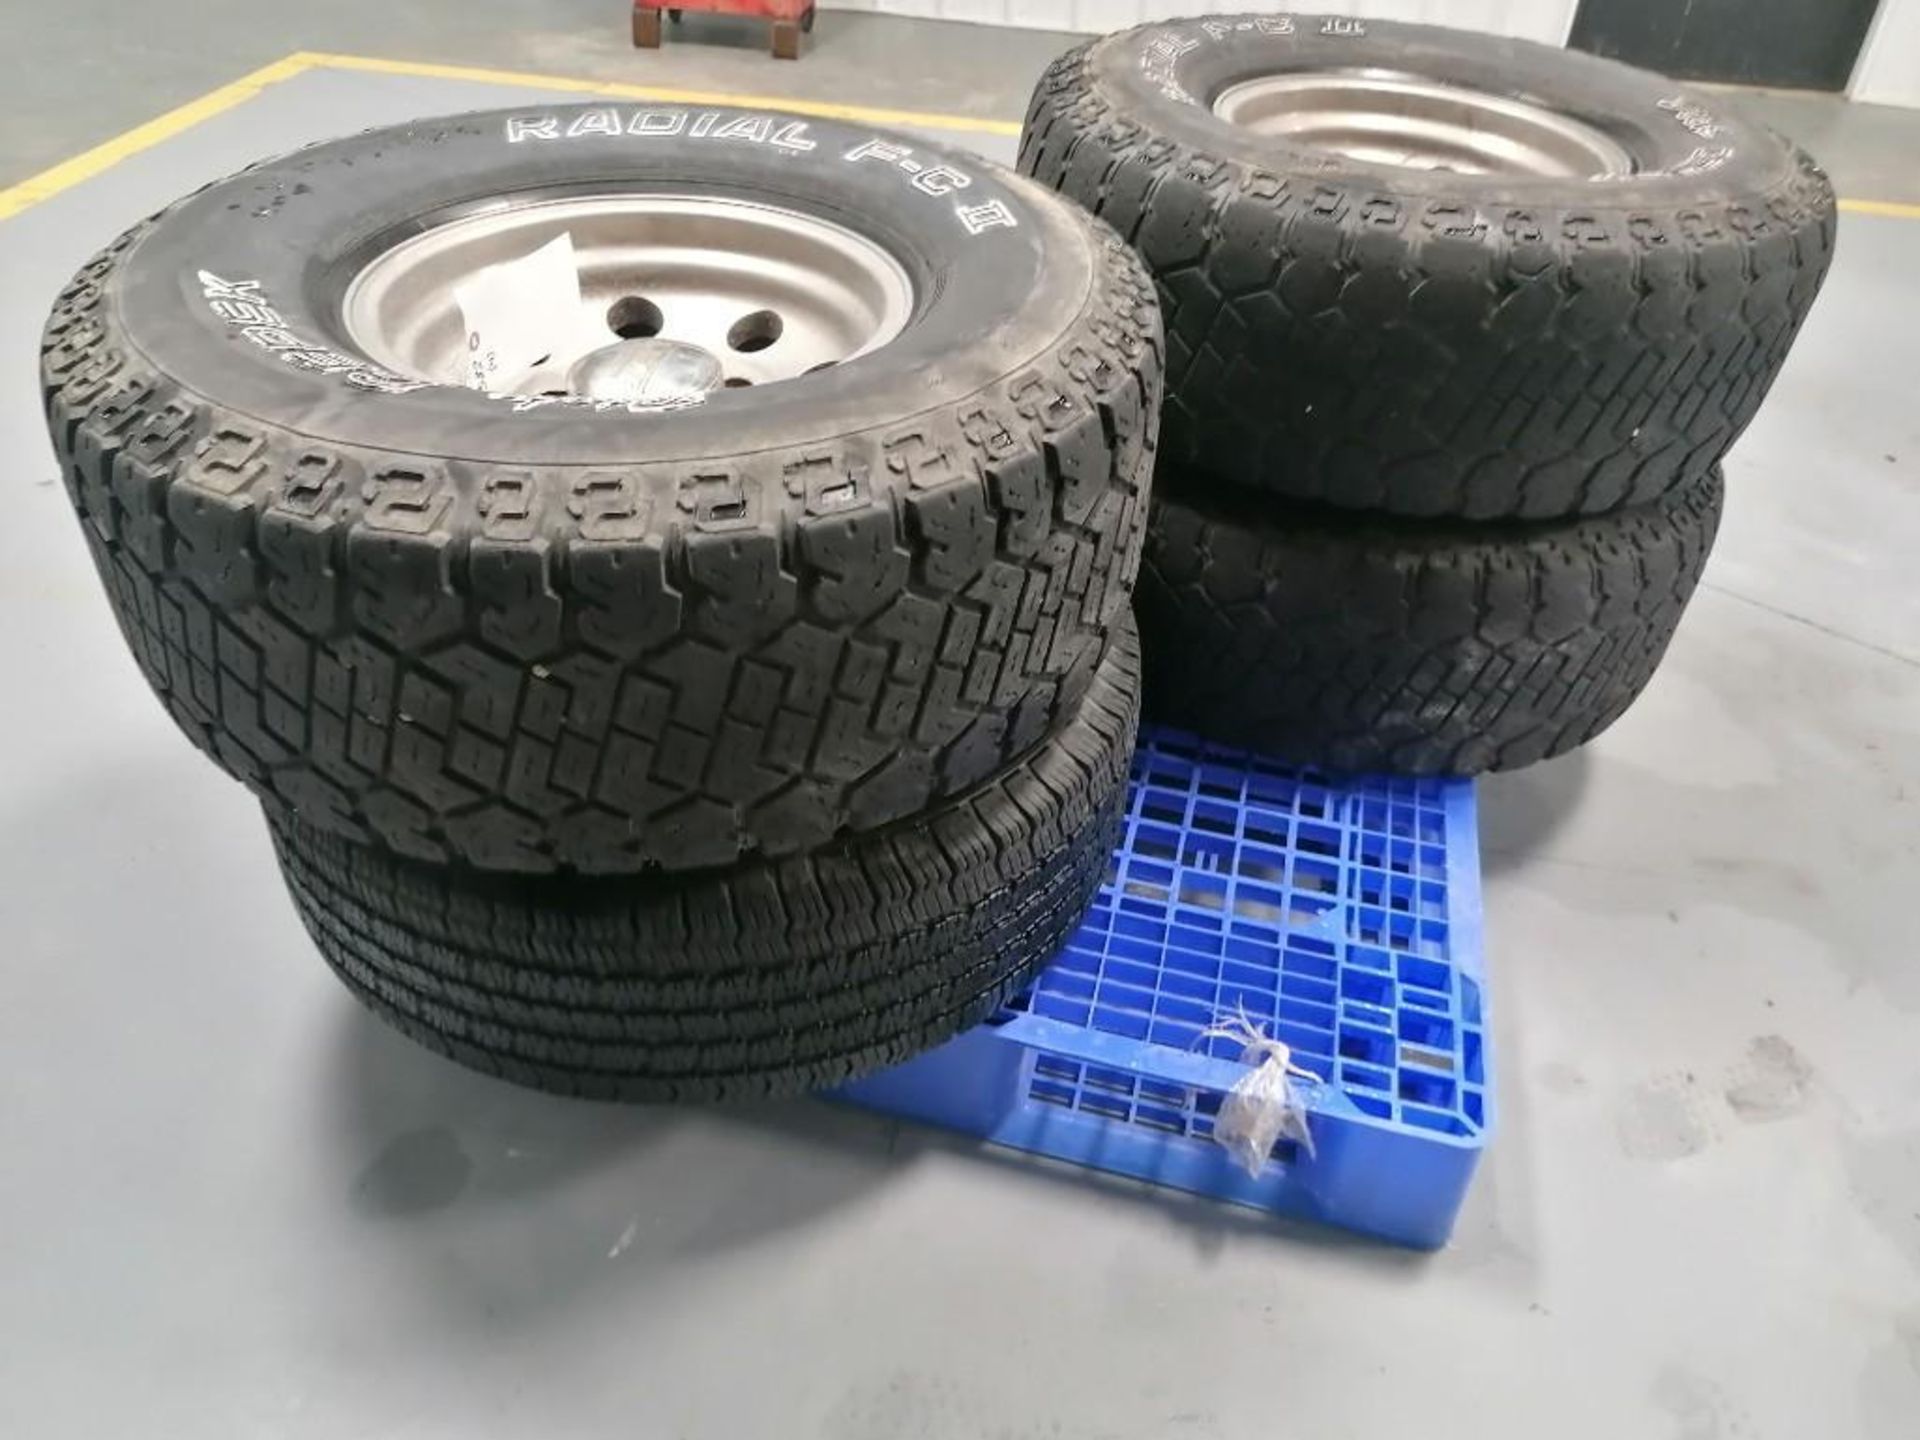 (4) Dick CEPEX Radial F-C II LT315 / 75 R16 Tires with 8 Hole Pattern Rims. Located in Mt. Pleasant,